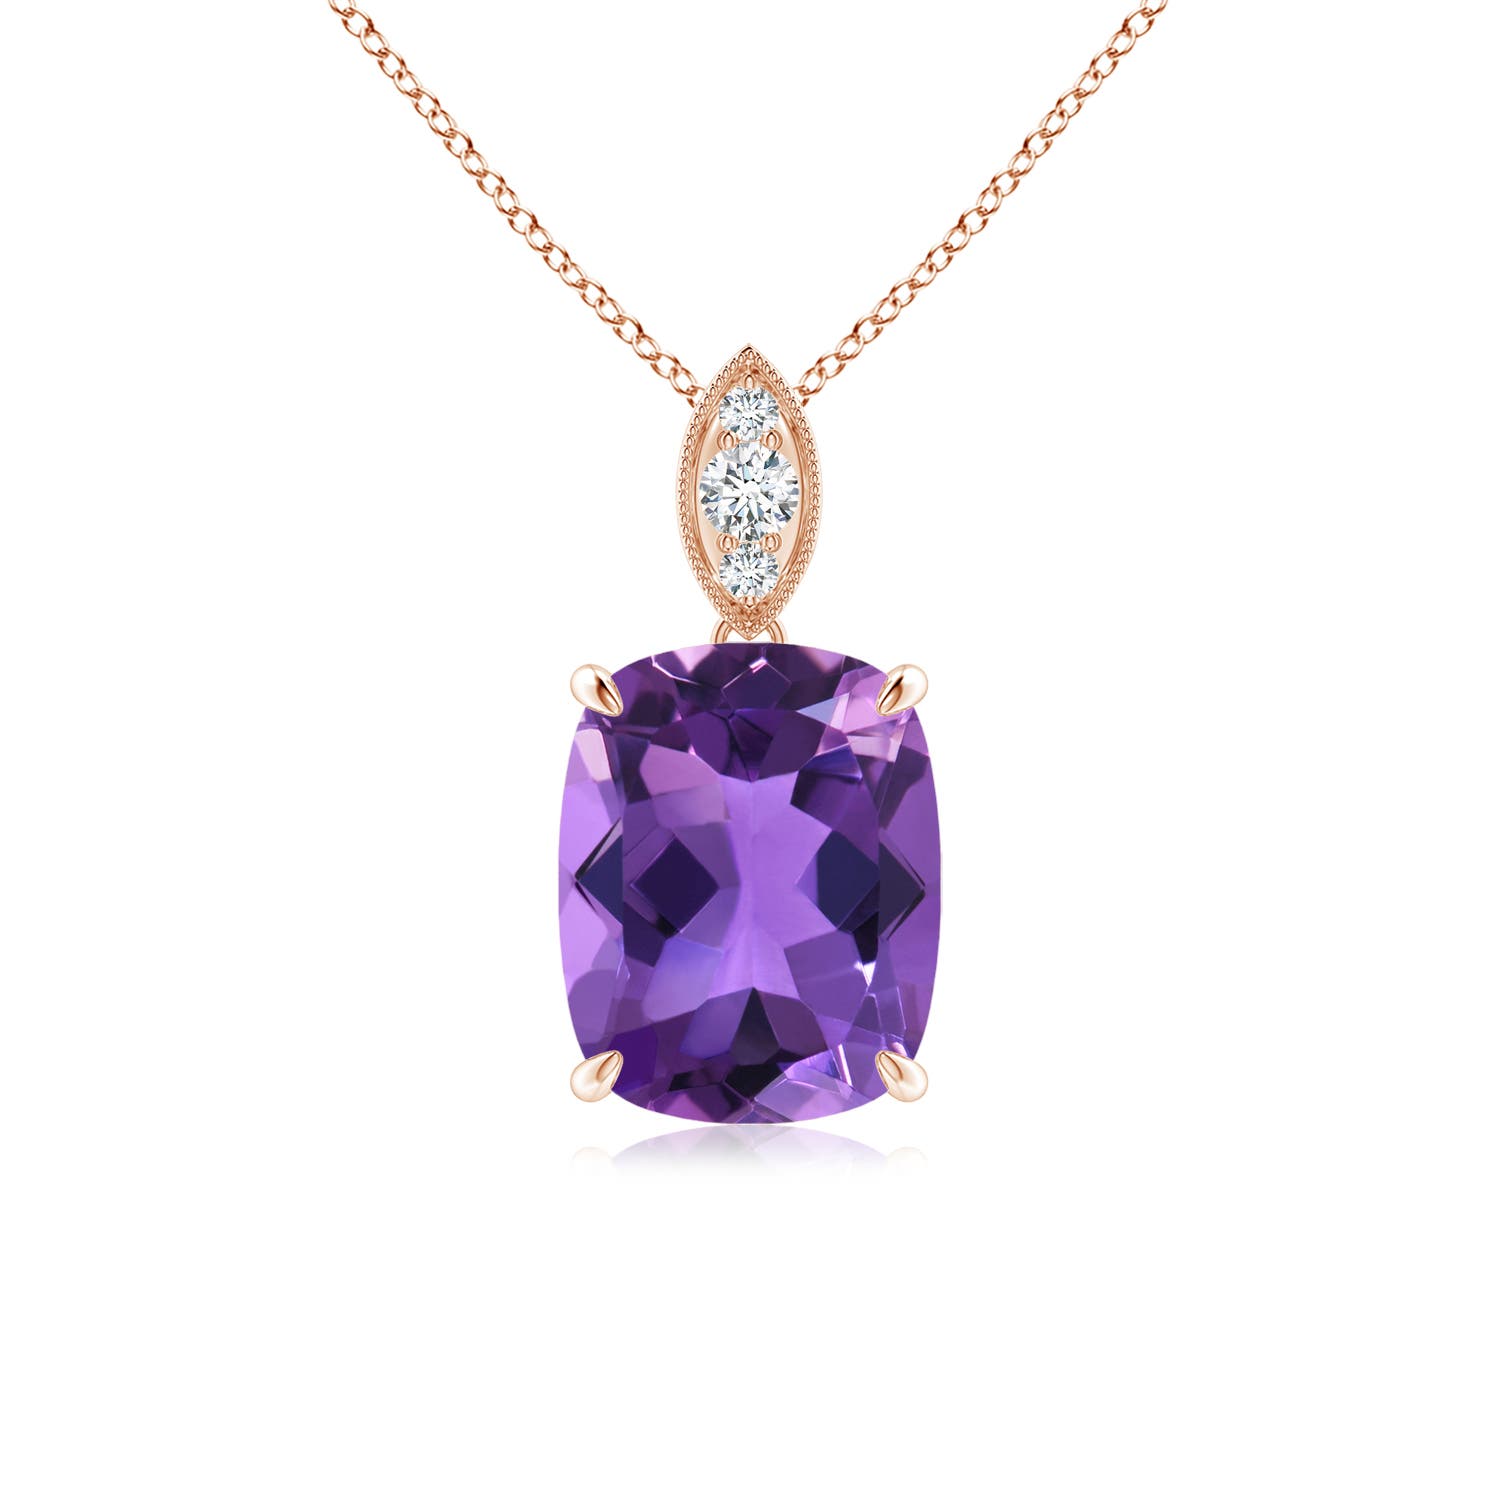 AAA - Amethyst / 2.03 CT / 14 KT Rose Gold